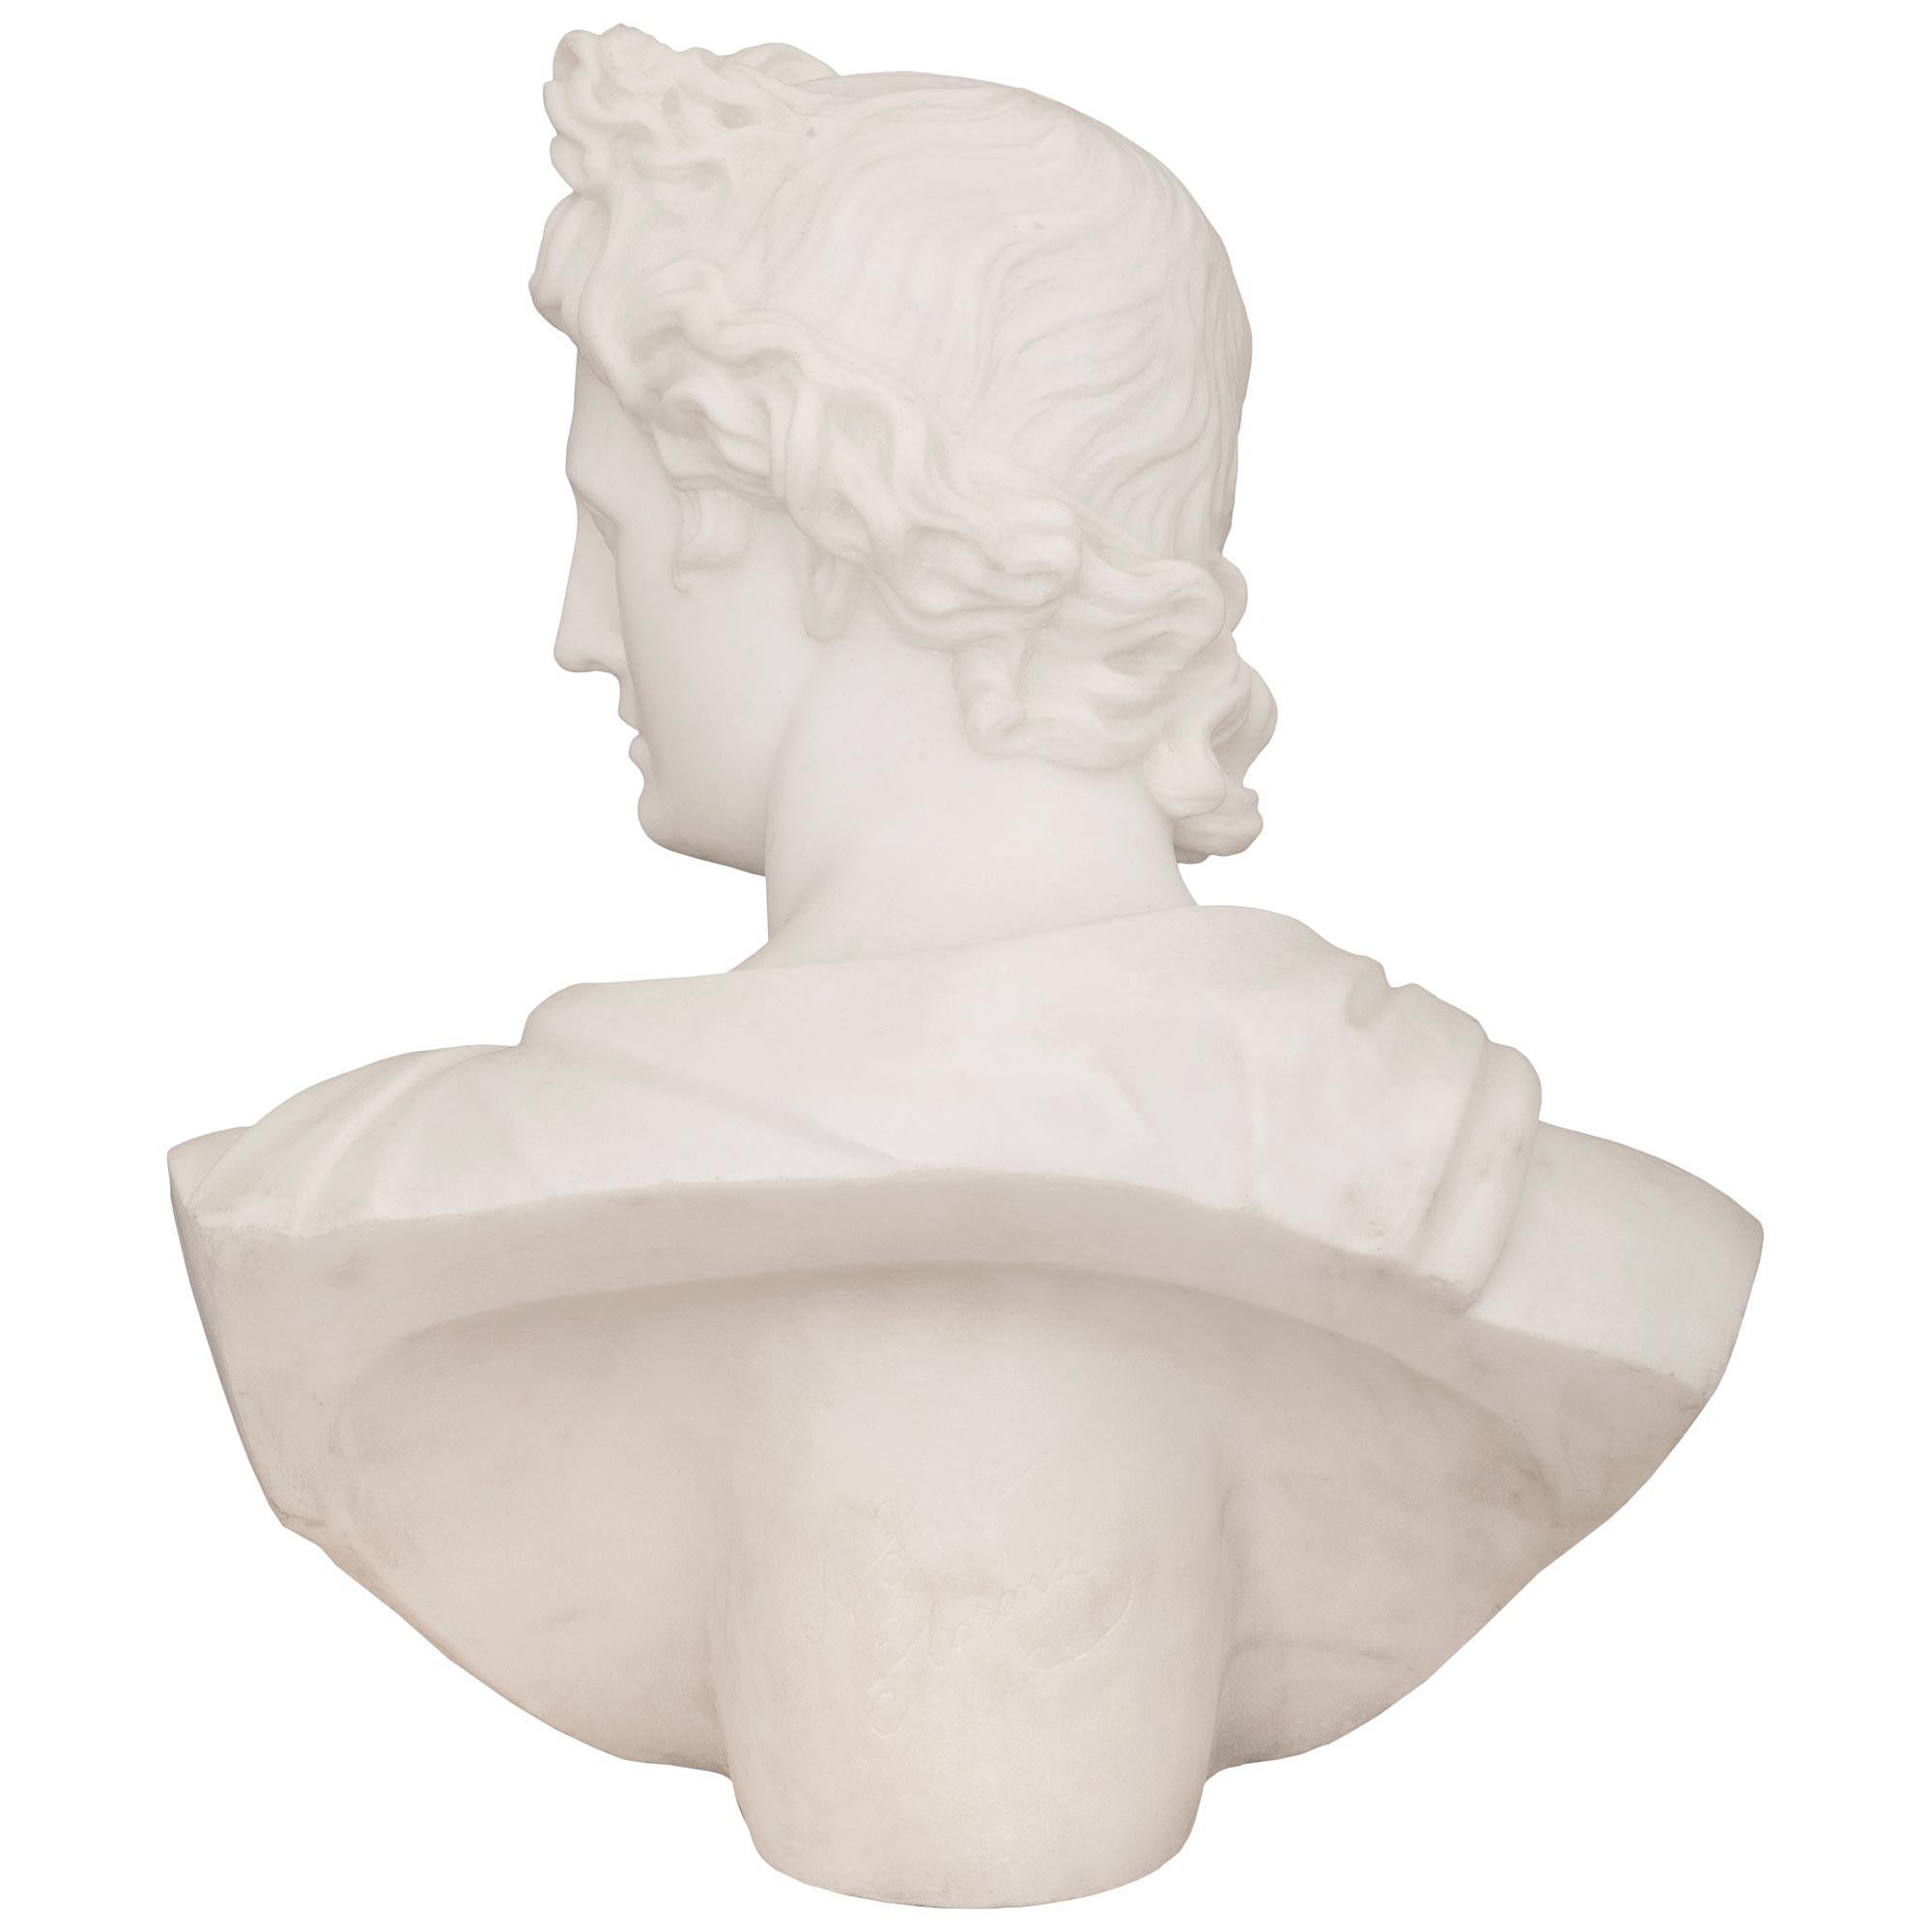 Italian 19th Century Neo-Classical St. Marble Bust of Apollo Belvedere For Sale 5